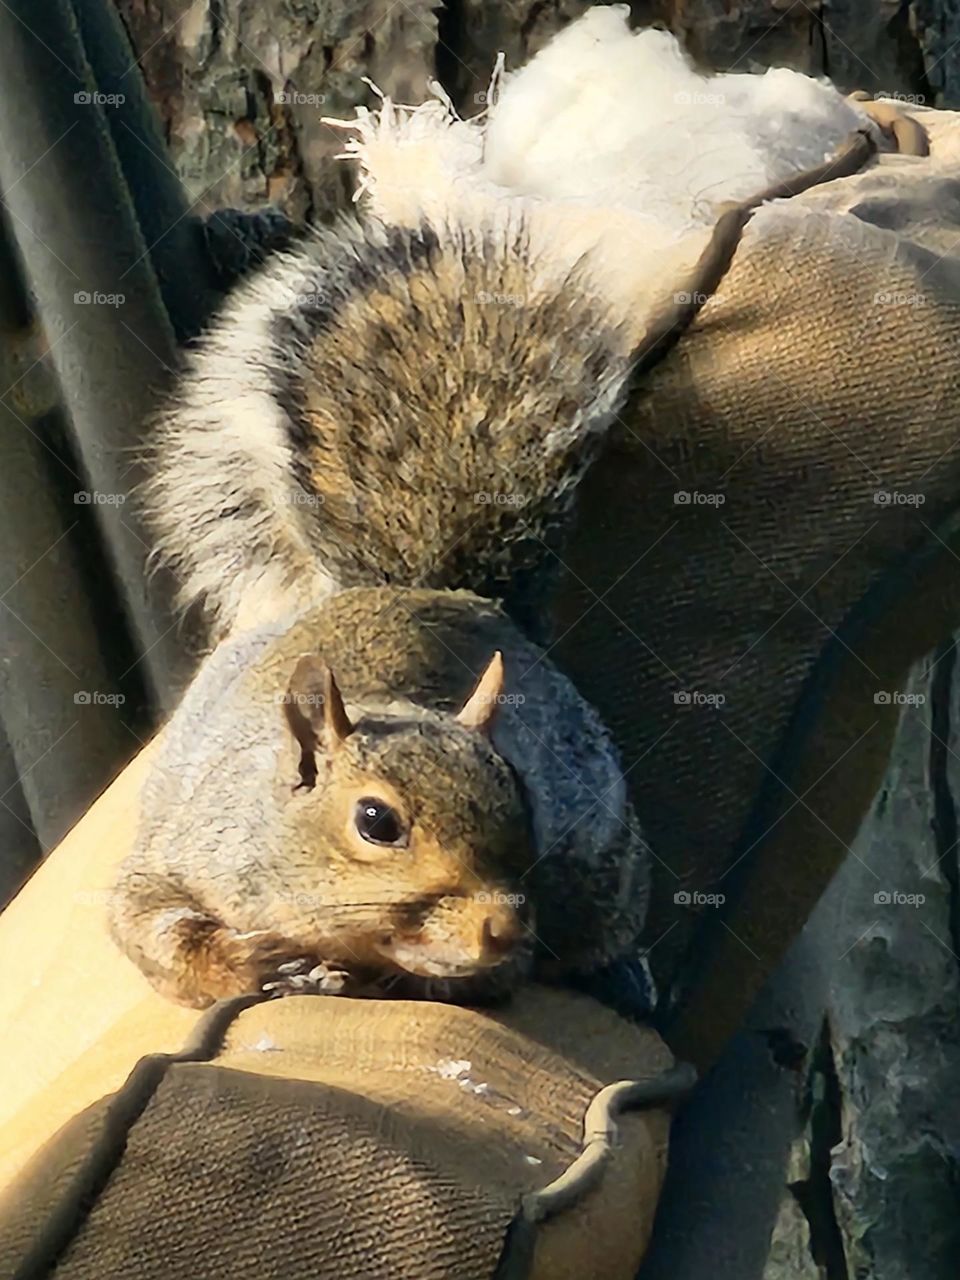 Life of a squirrel